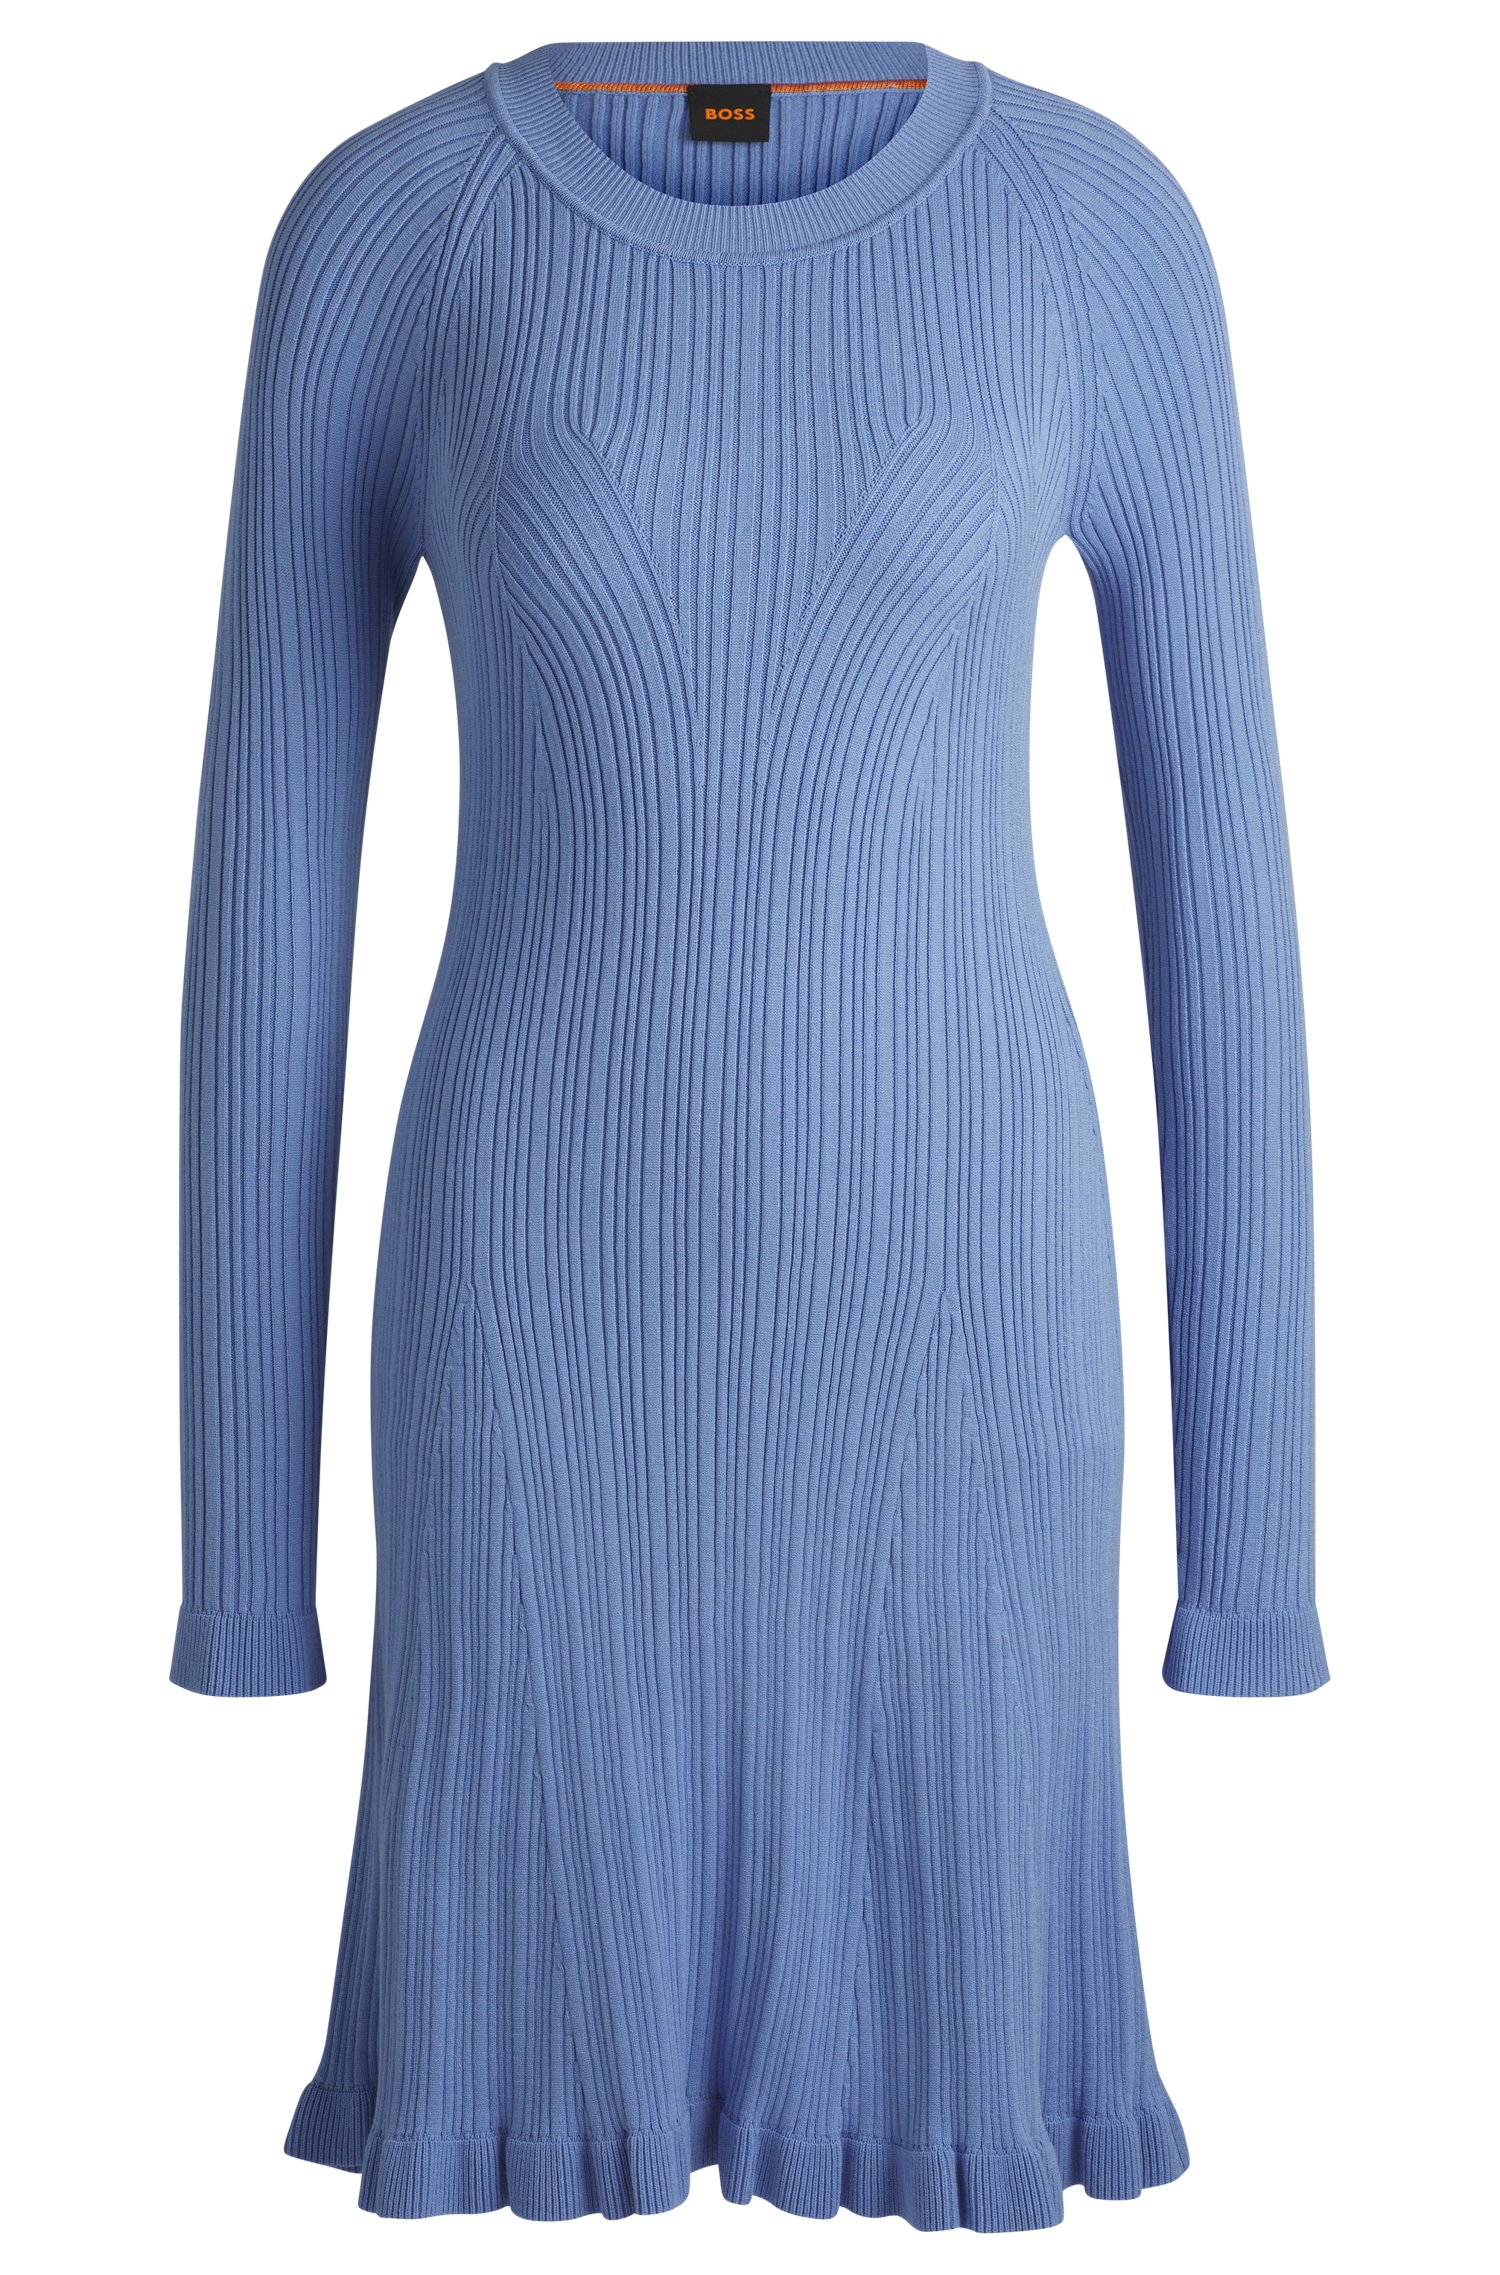 Long-sleeved knitted dress with ribbed structure